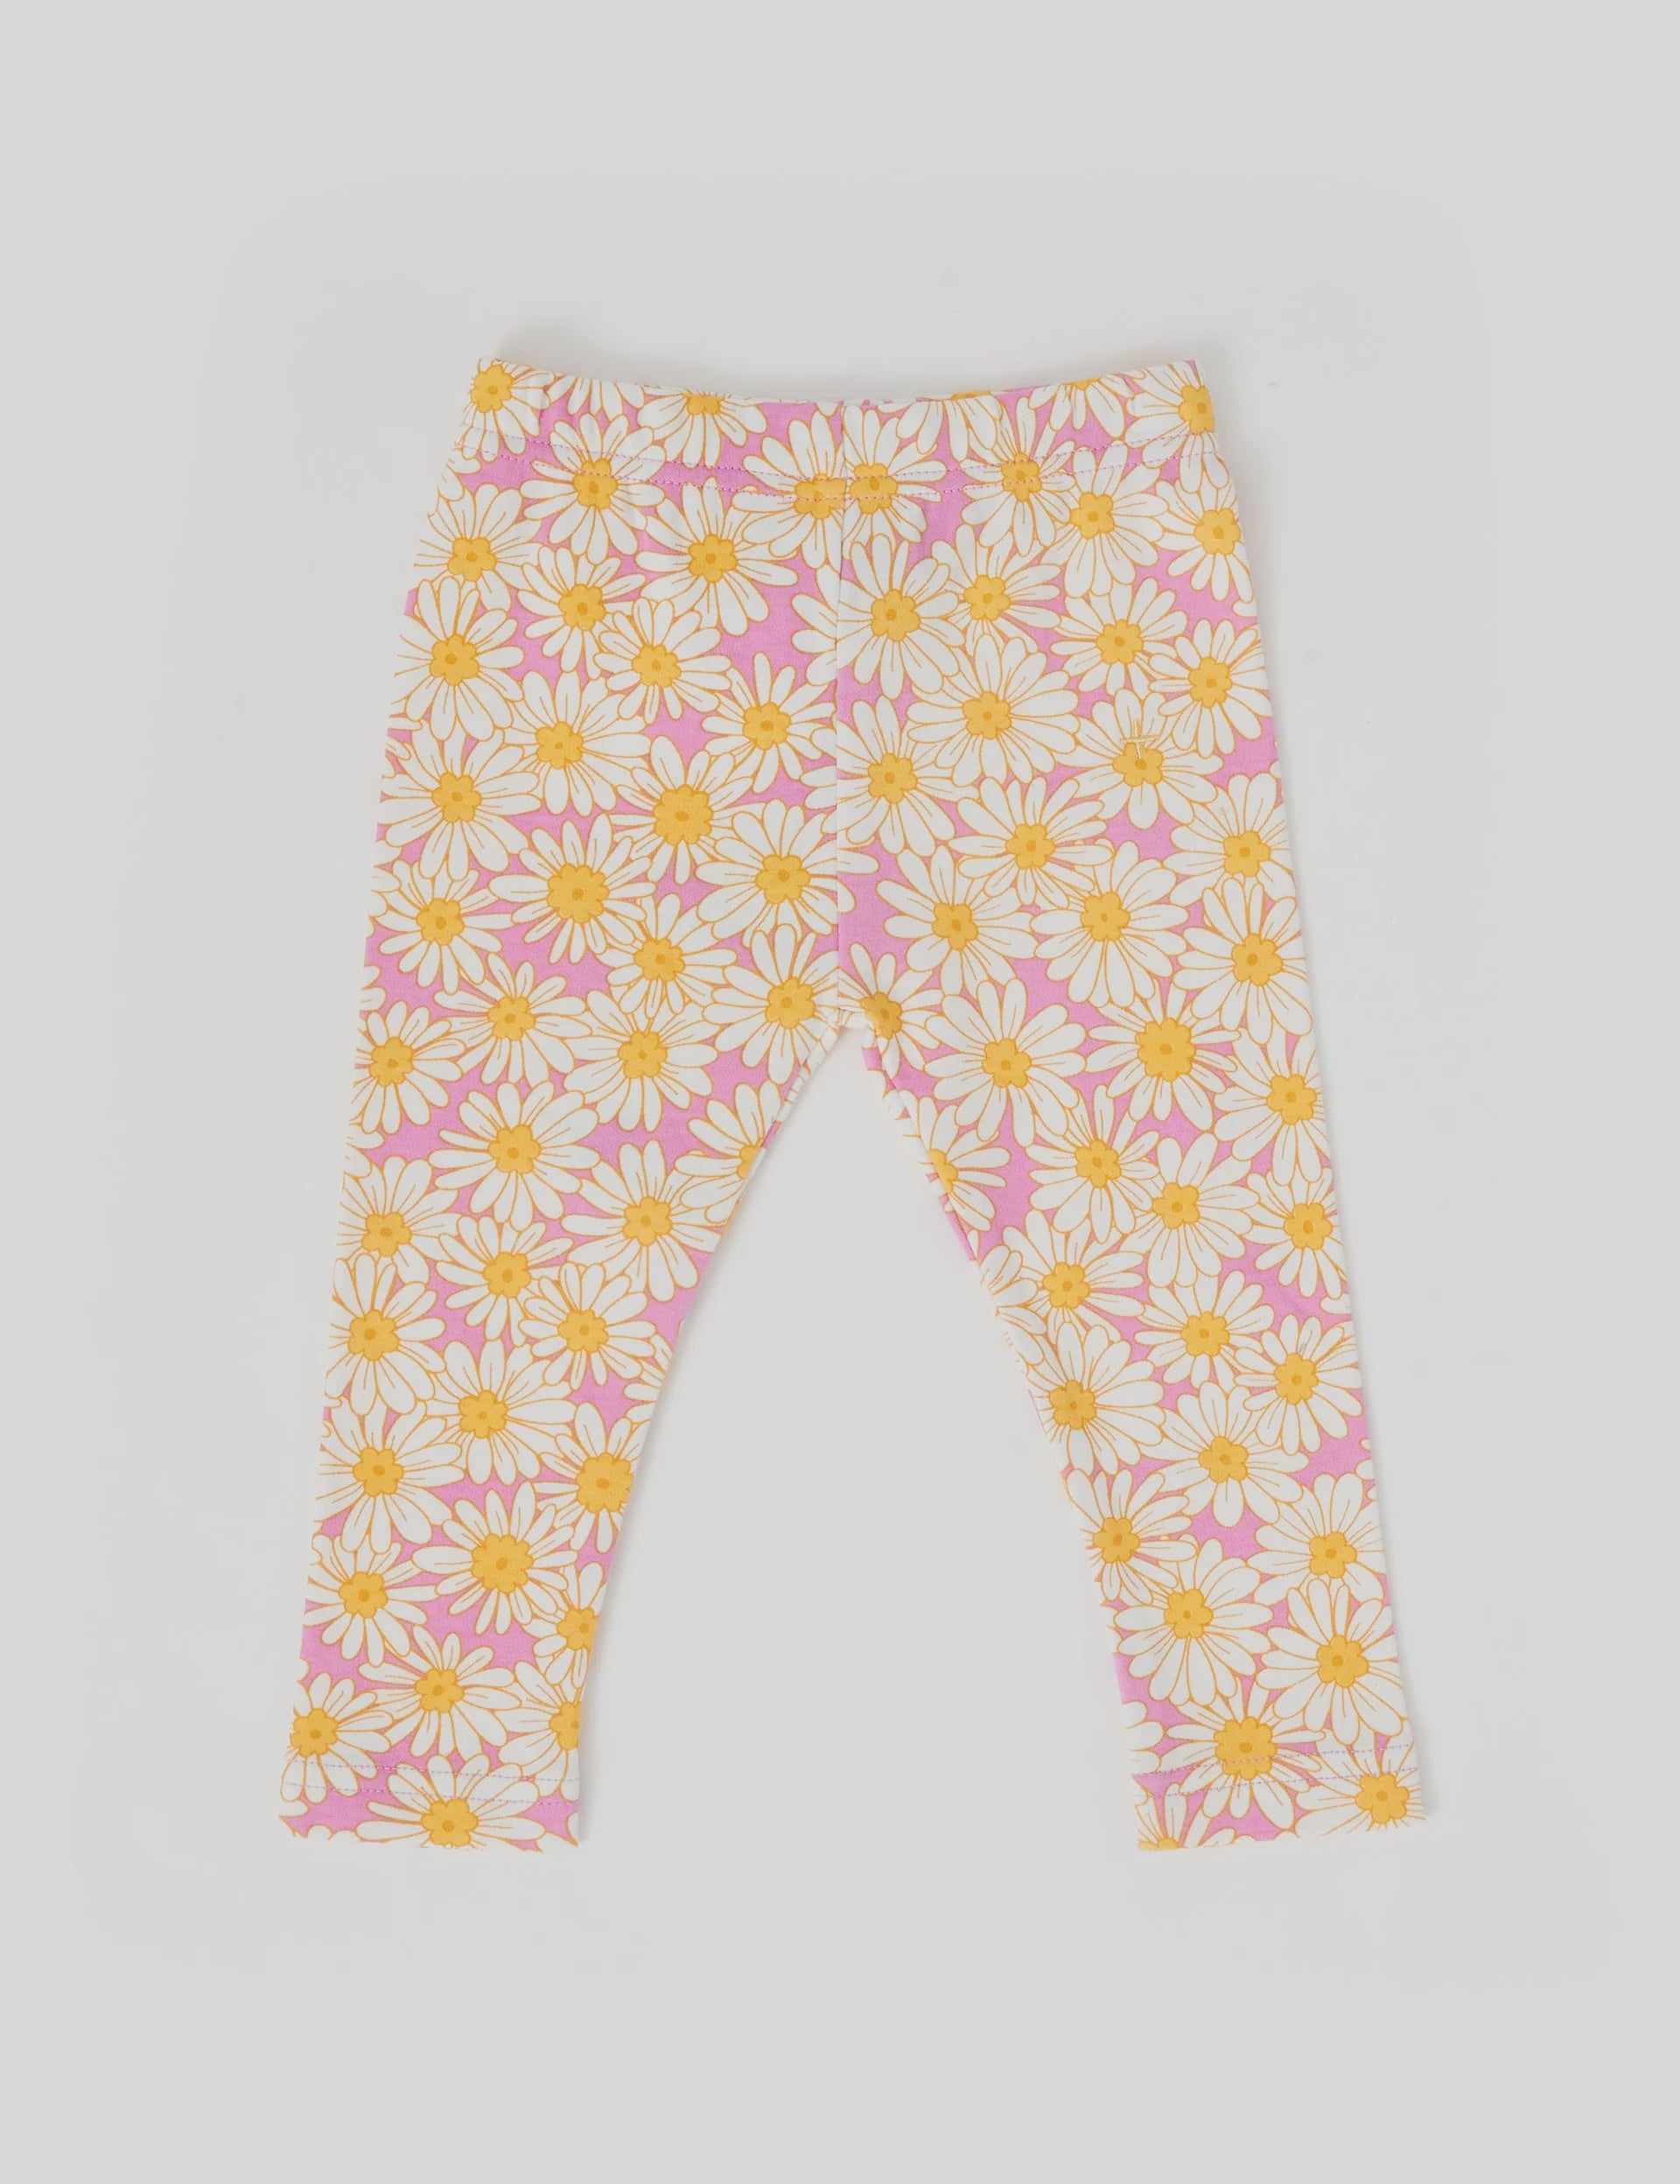 DAISY MEADOW LEGGINGS |  Goldie and Ace